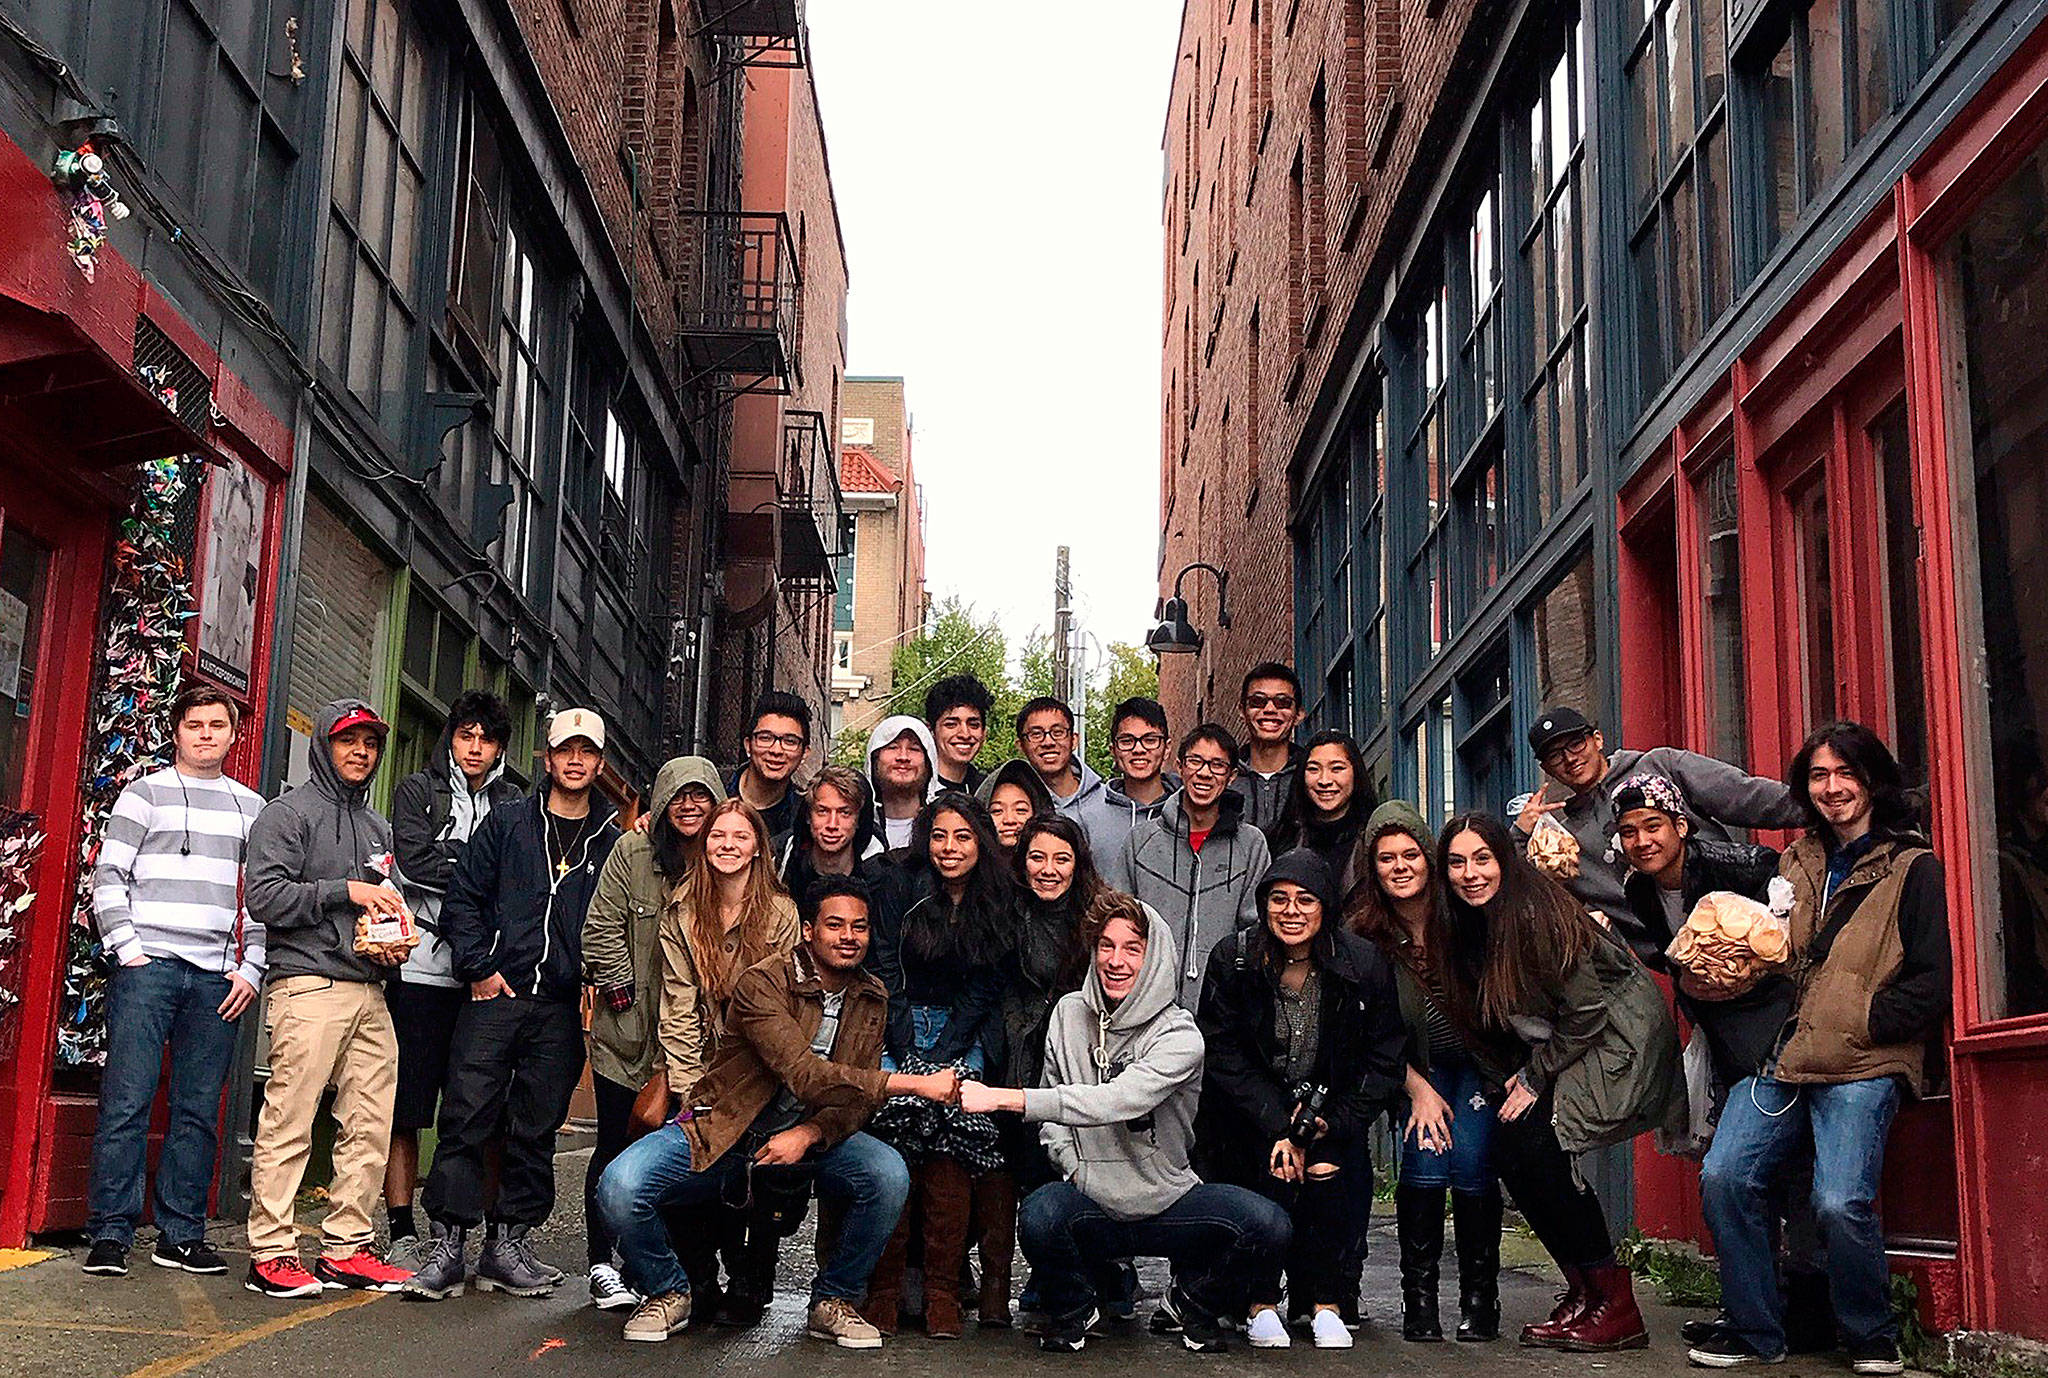 Cascade High School students from teacher Scott Loucks’ English class visited Canton Alley in Seattle’s International District recently after reading “Hotel on the Corner of Bitter and Sweet.” Jamie Ford’s novel is set in Seattle during World War II, when Japanese-Americans were sent to internment camps. (Everett School District photo)